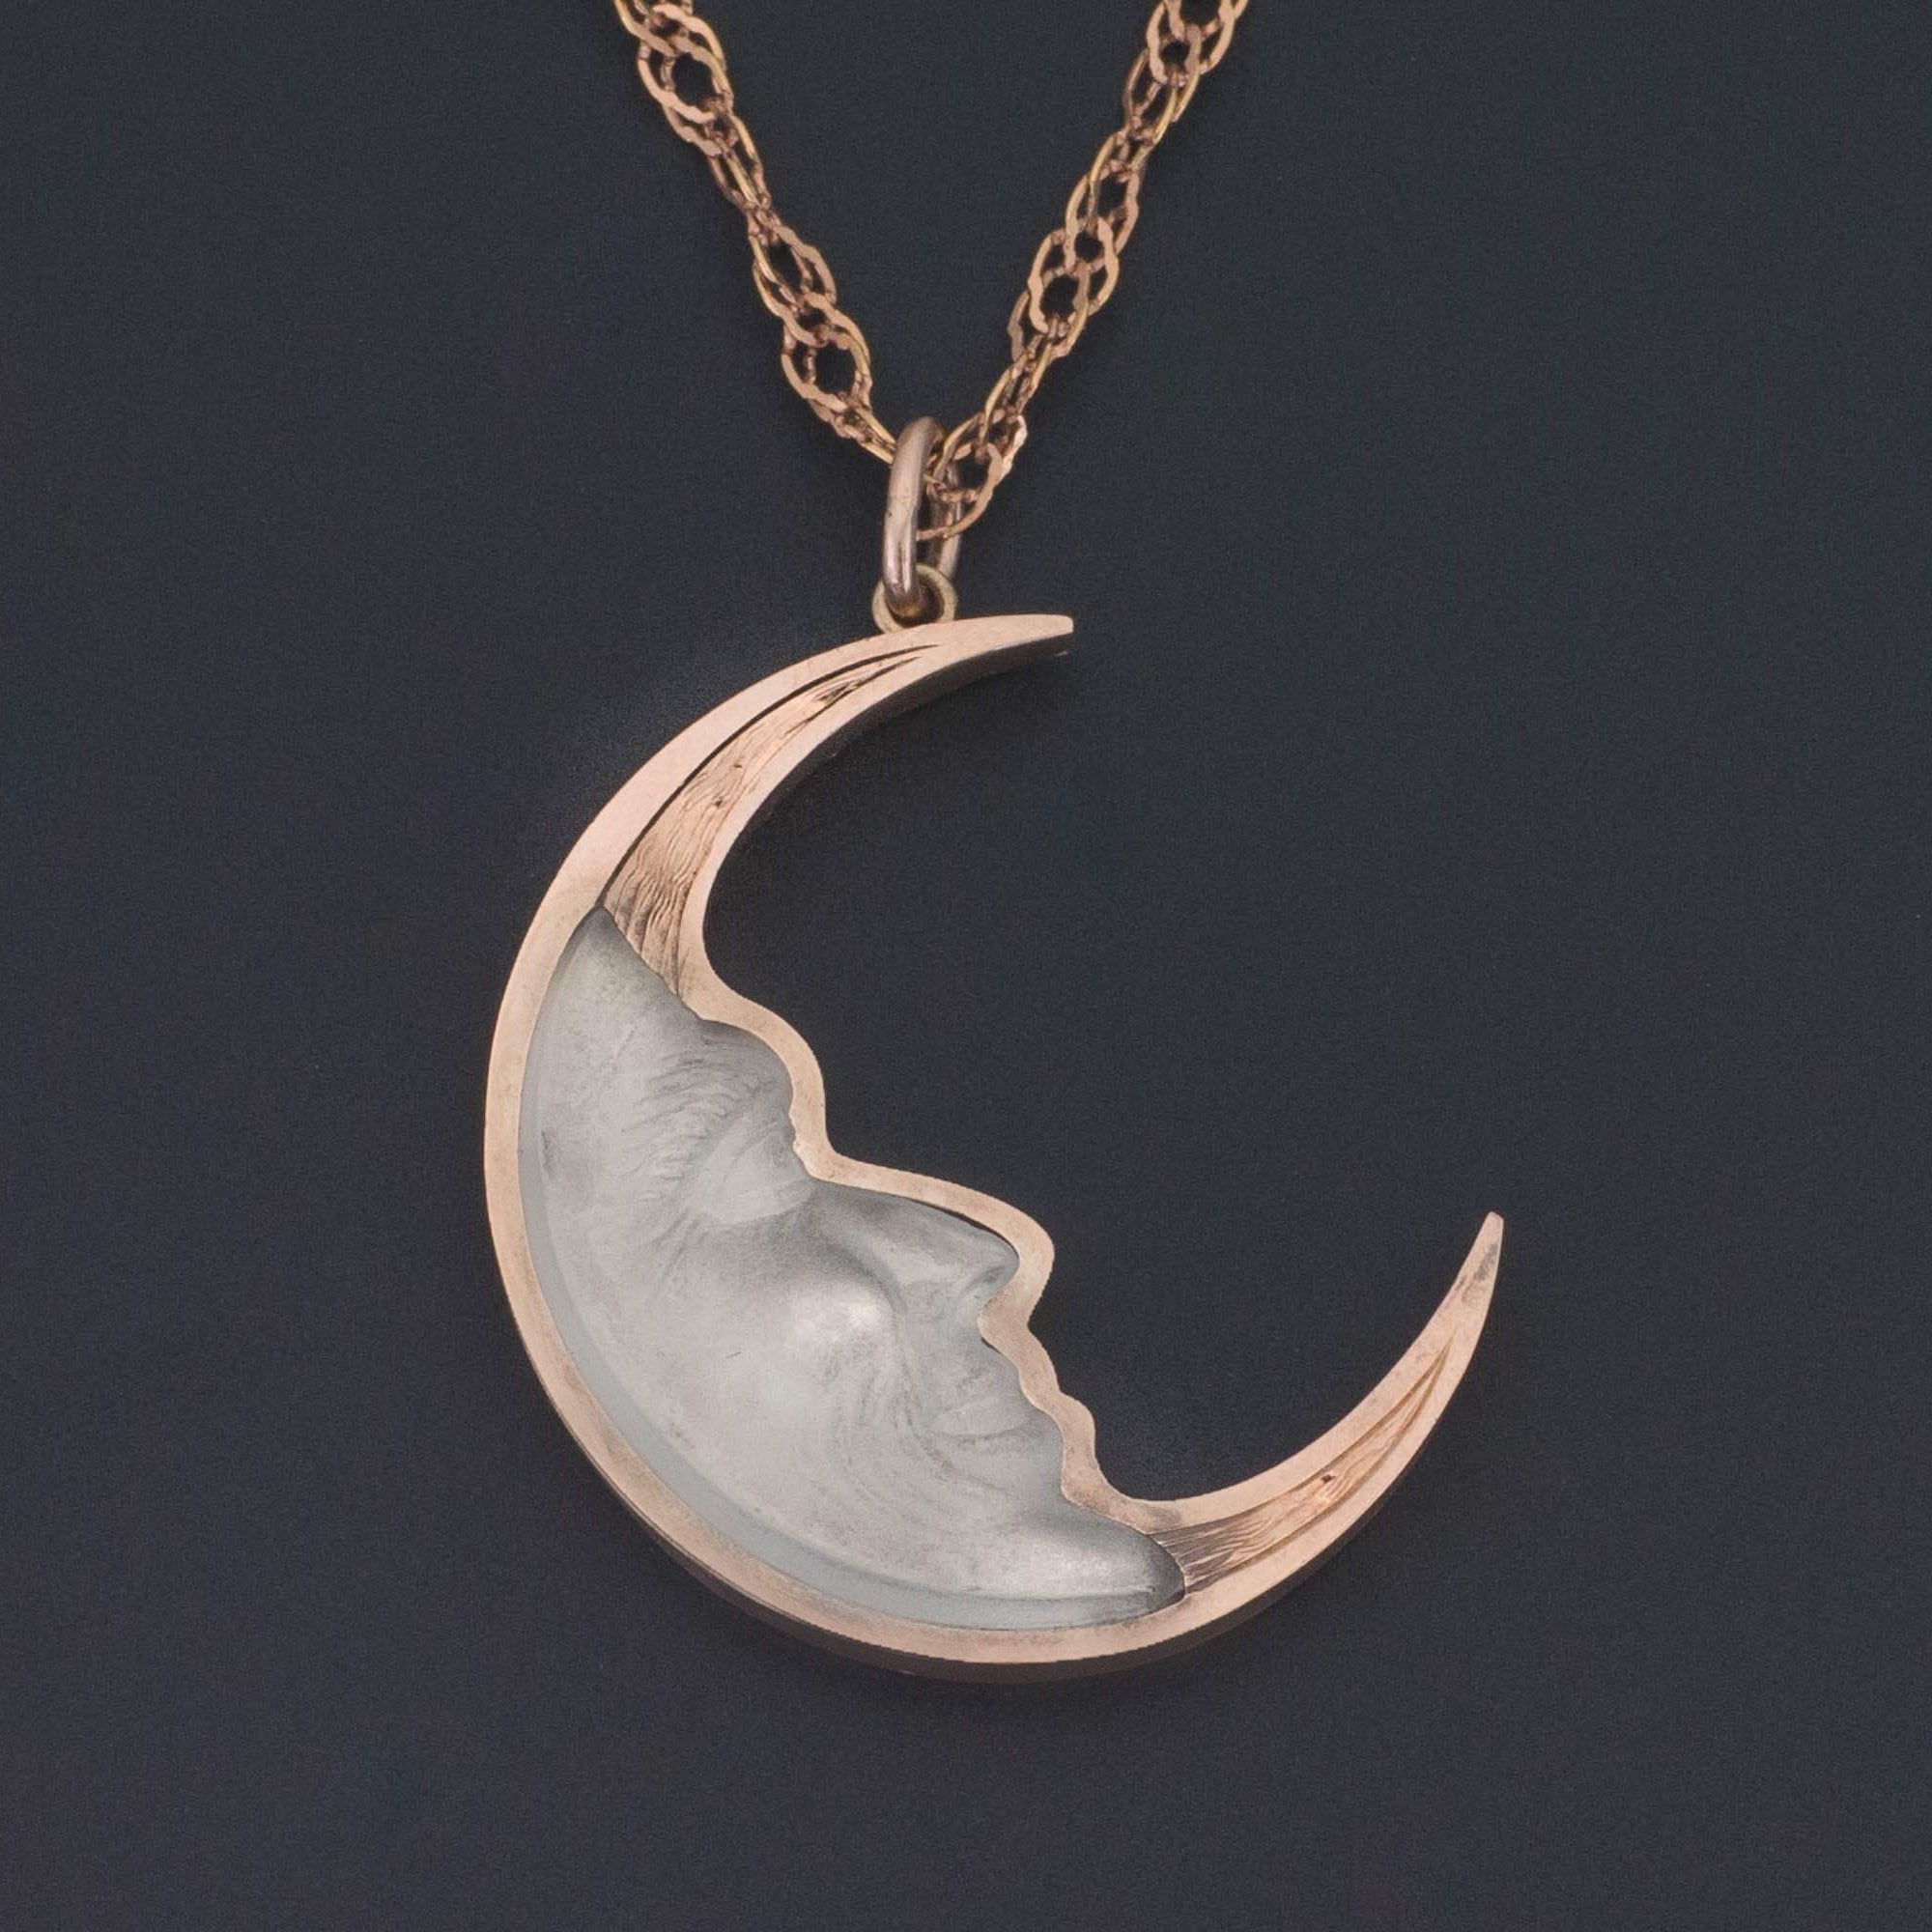 Man In The Moon Pendant | Antique Pin Conversion | 9ct Rose Gold & Silver Pendant on Optional 18k Rose Gold Chain